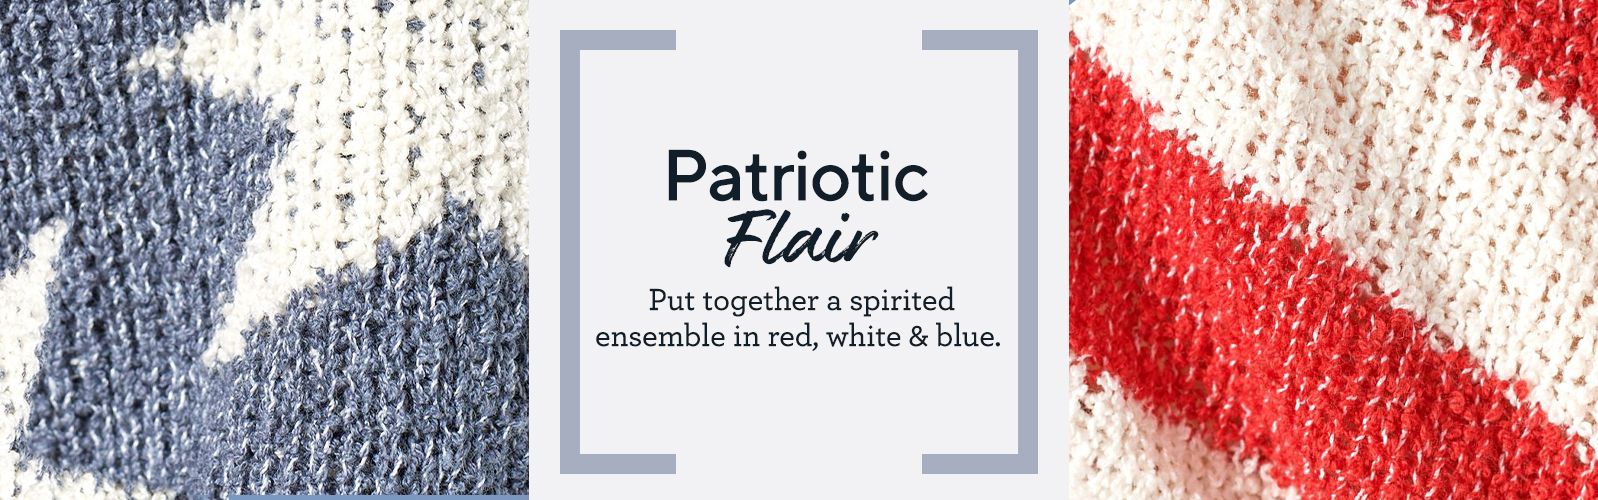 Patriotic Flair.  Put together a spirited ensemble in red, white & blue. 